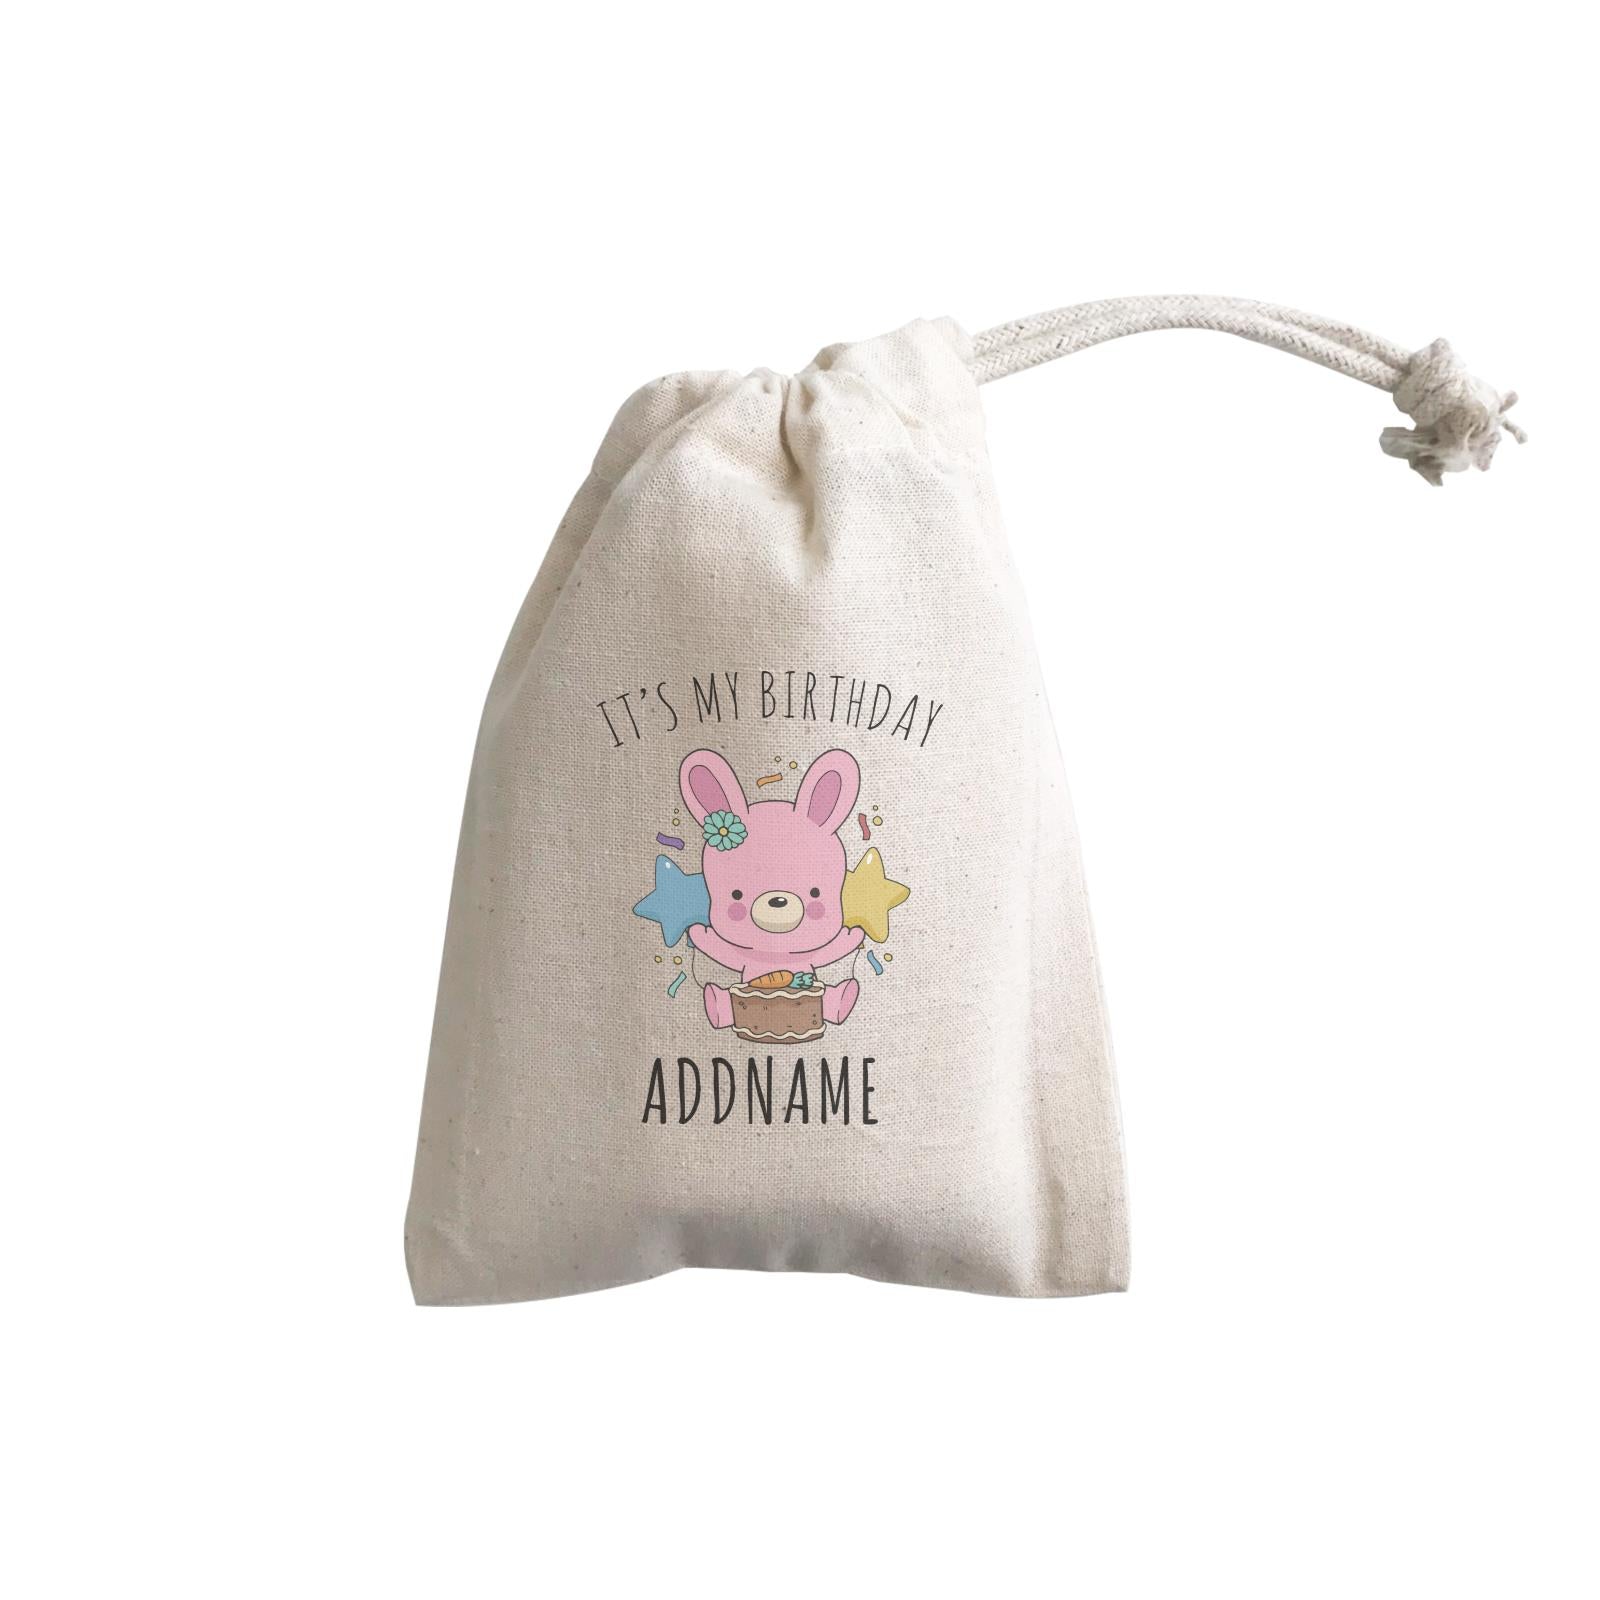 Birthday Sketch Animals Rabbit With Carrot Cake It's My Birthday Addname GP Gift Pouch